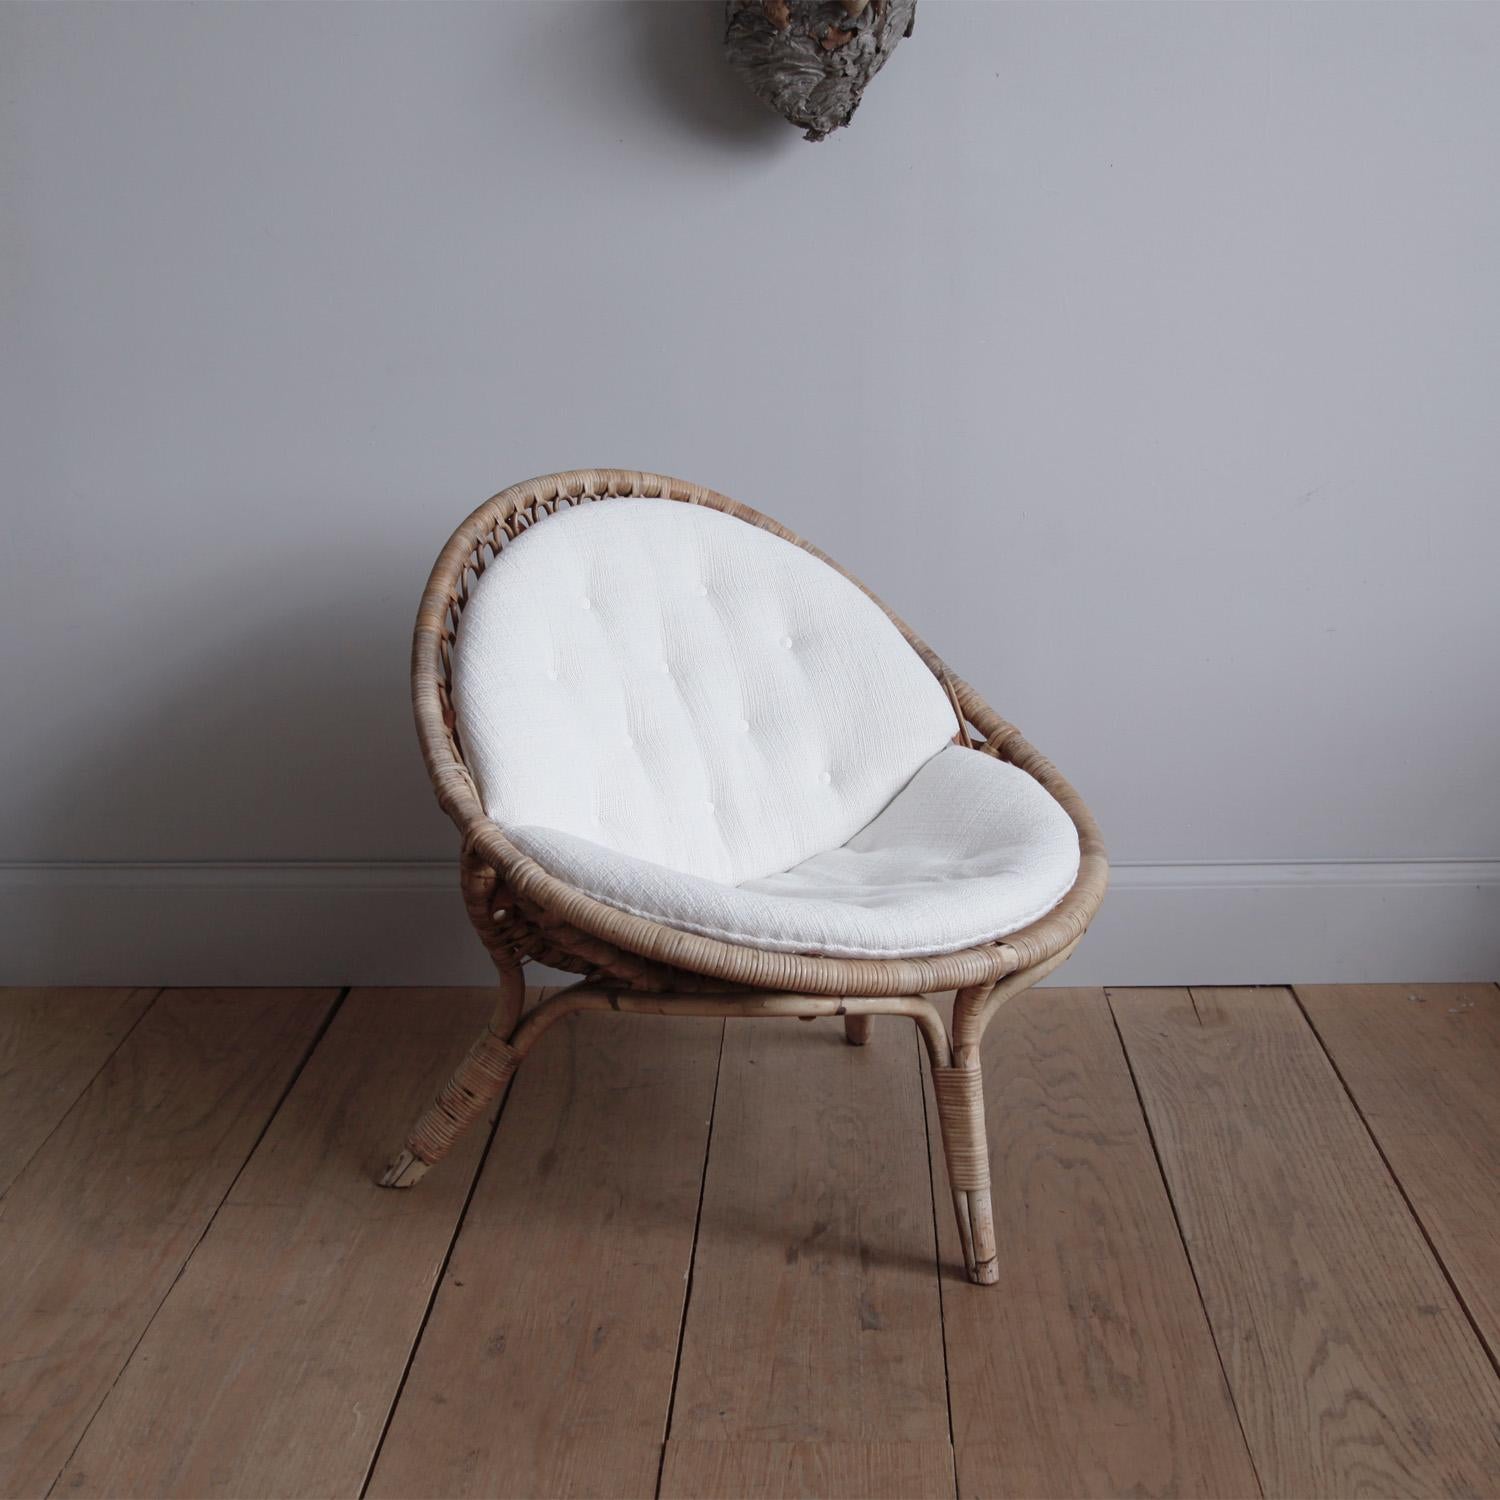 A rare original example of one of Nanna Ditzel’s wonderful rattan designs for R. Wengler of Copenhagen. Often called the First Lady of Danish Design, Ditzel cared deeply about quality and comfort, but her designs transcend purely practical